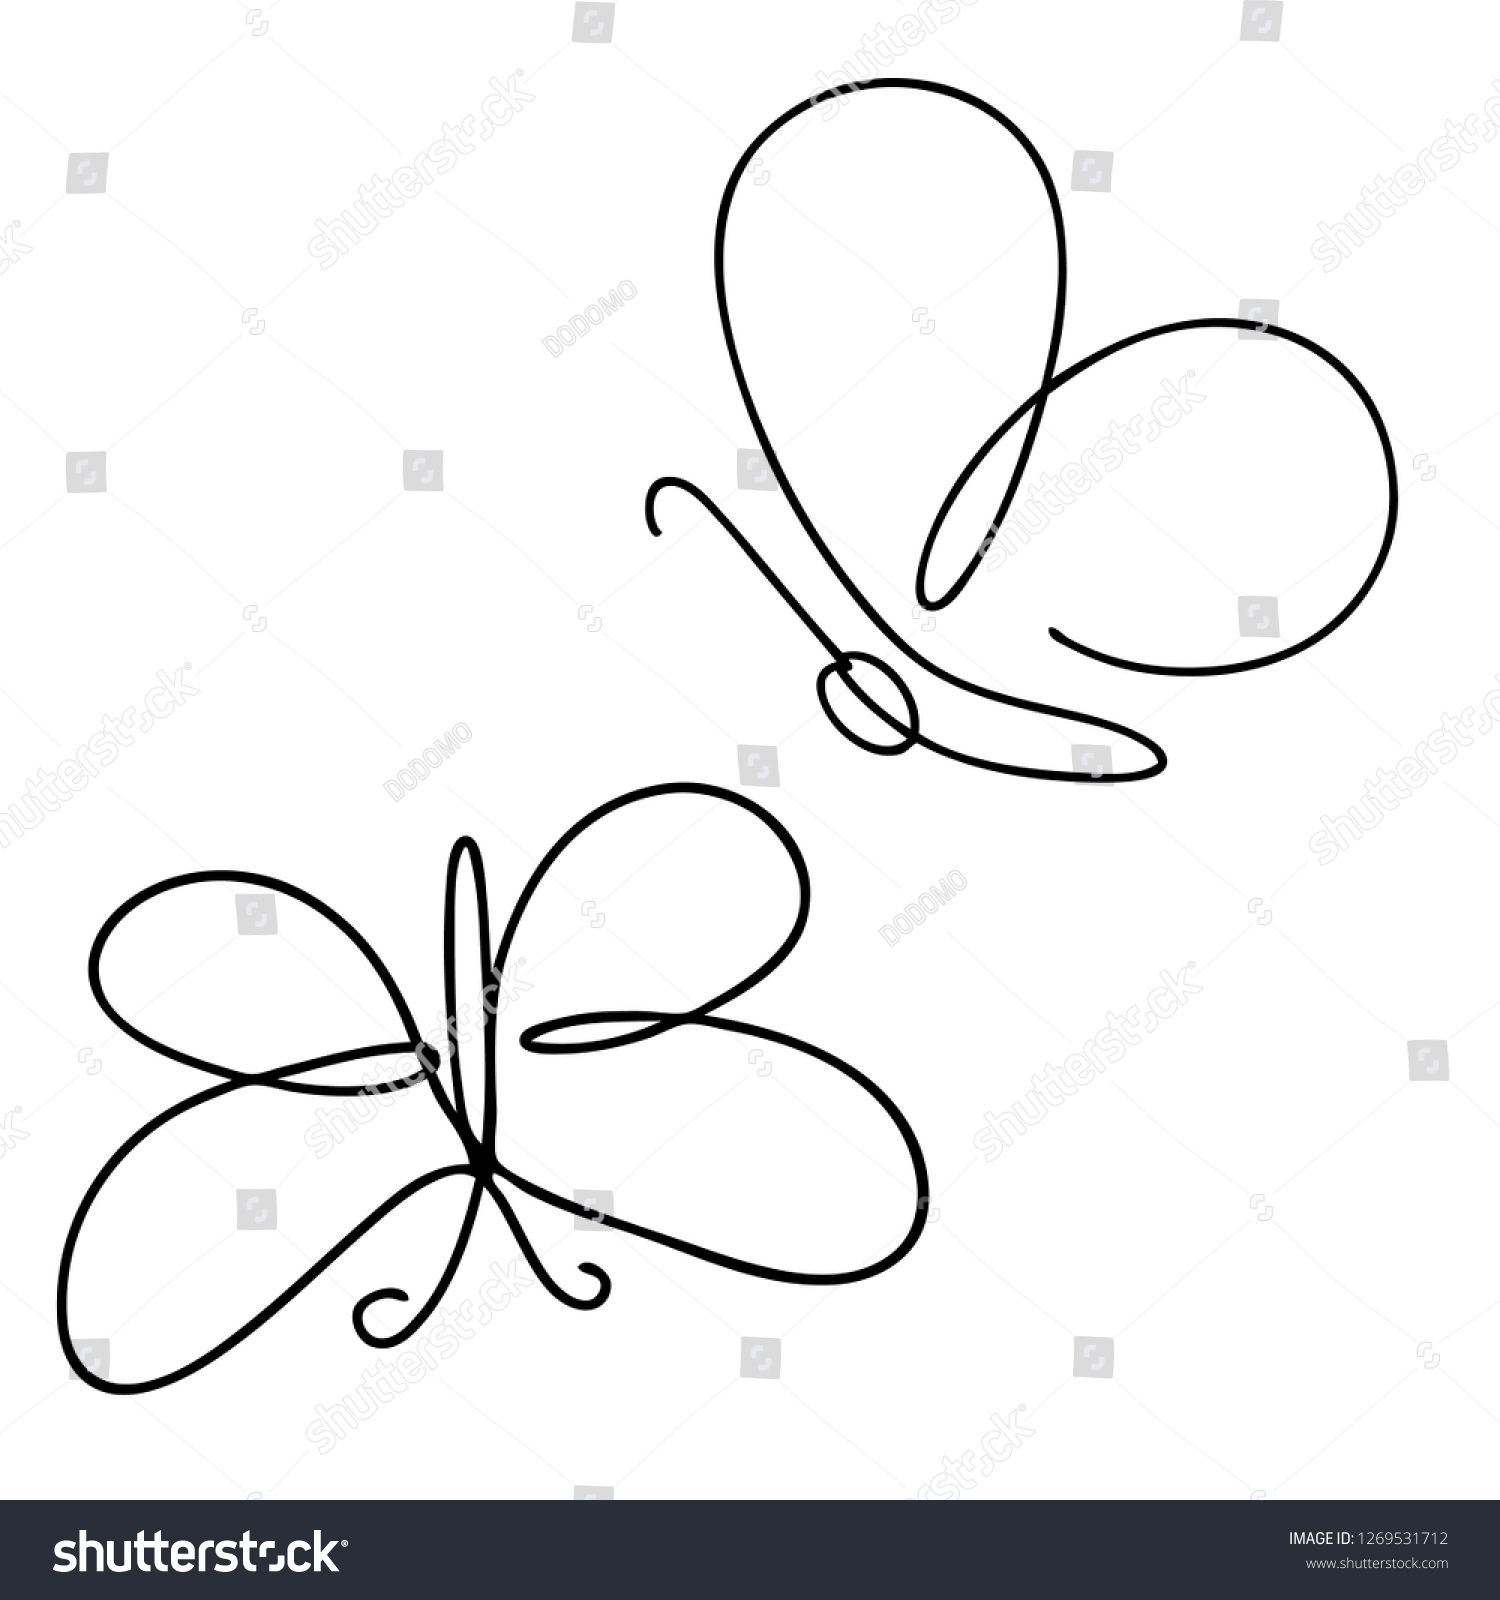 Continuous Line Art One Line Drawing Stock Vector Royalty Free